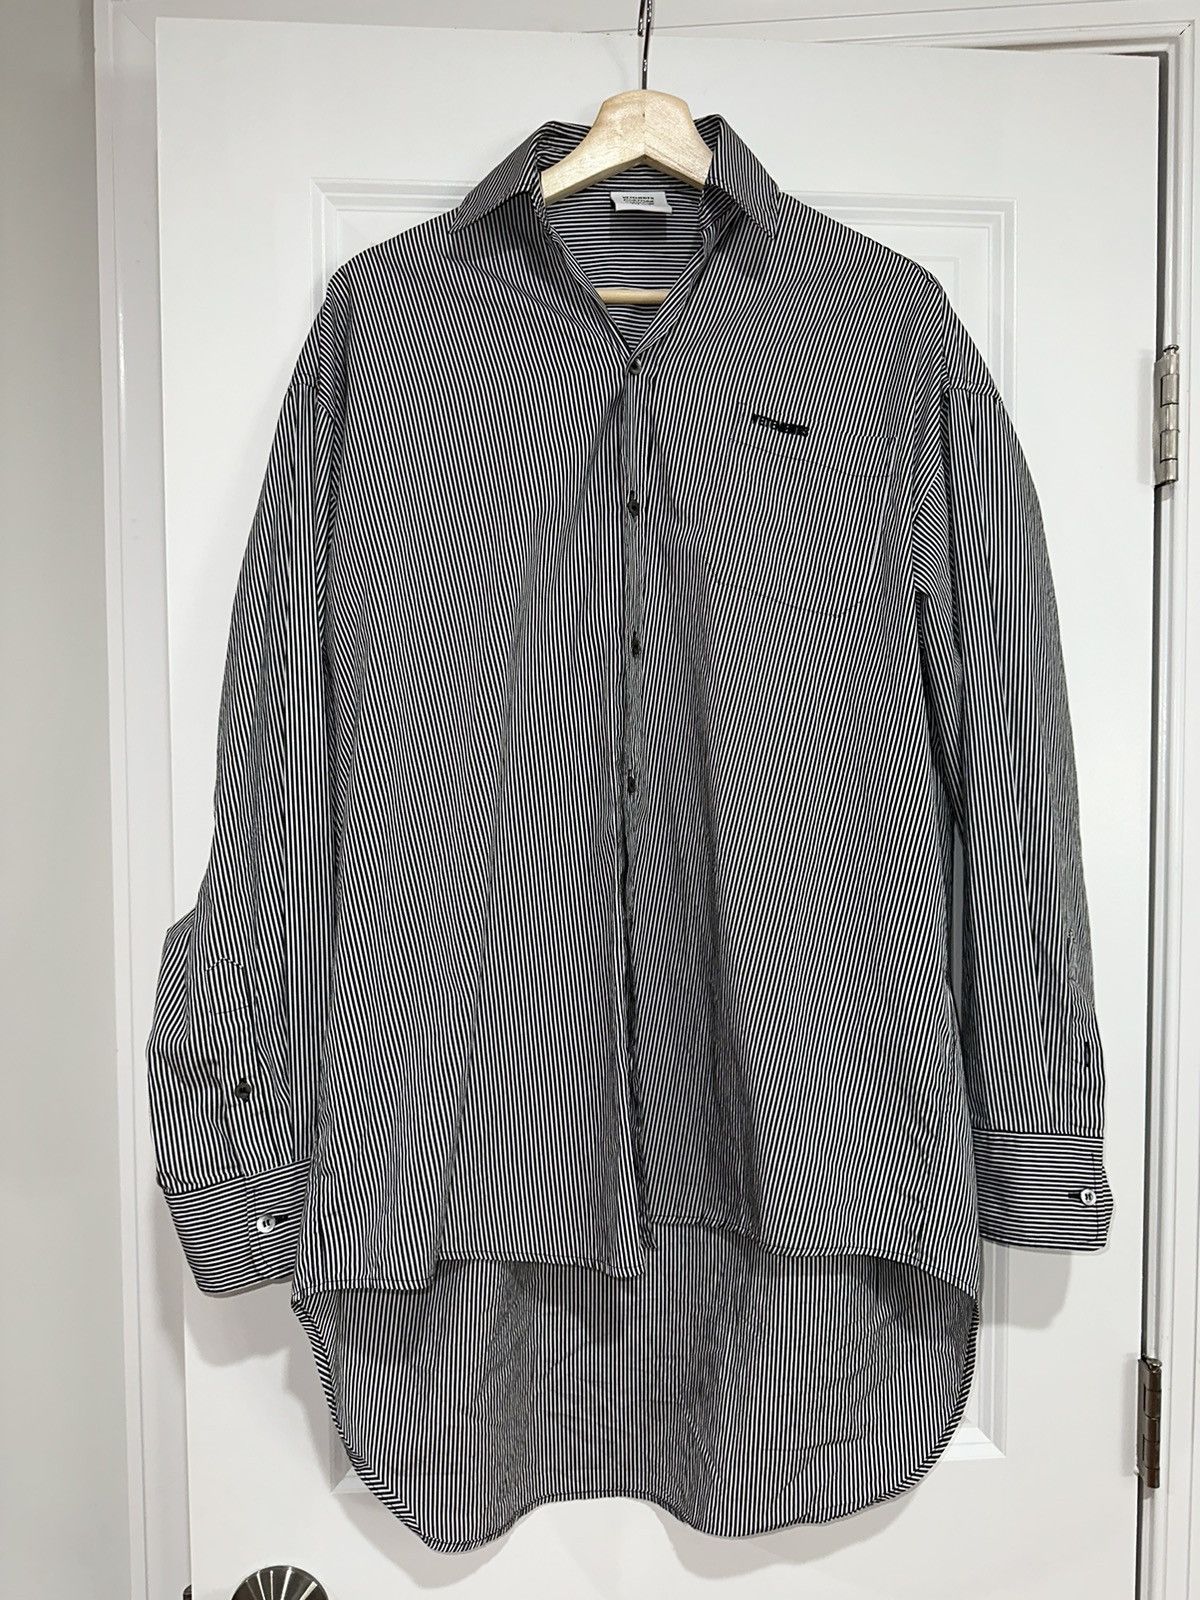 Vetements Oversized Striped Button Shirt | Grailed